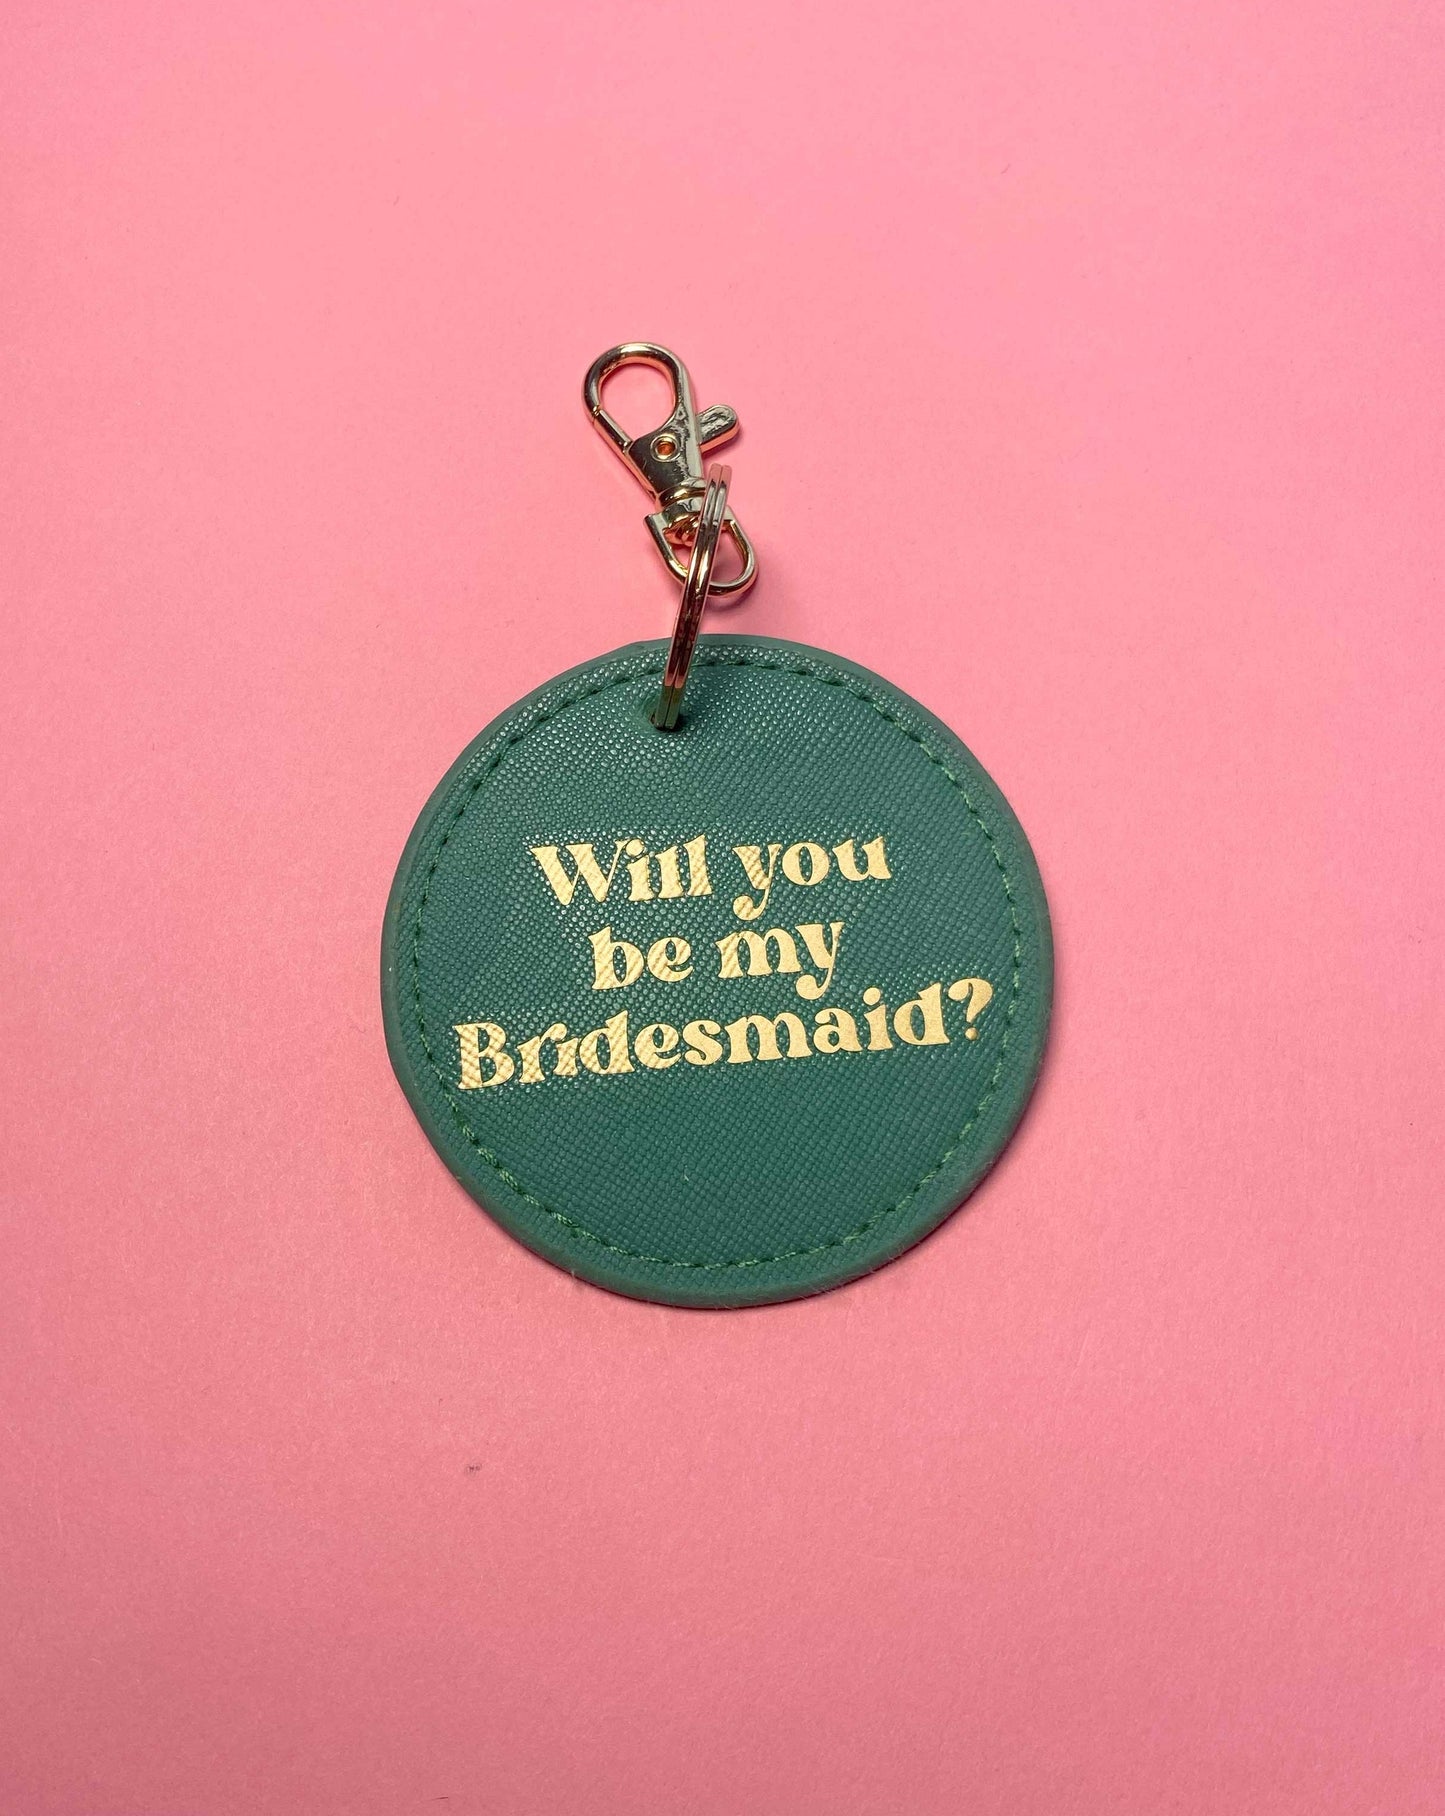 Will You Be My Bridesmaid Keyring Bag Charm - Teal - SALE